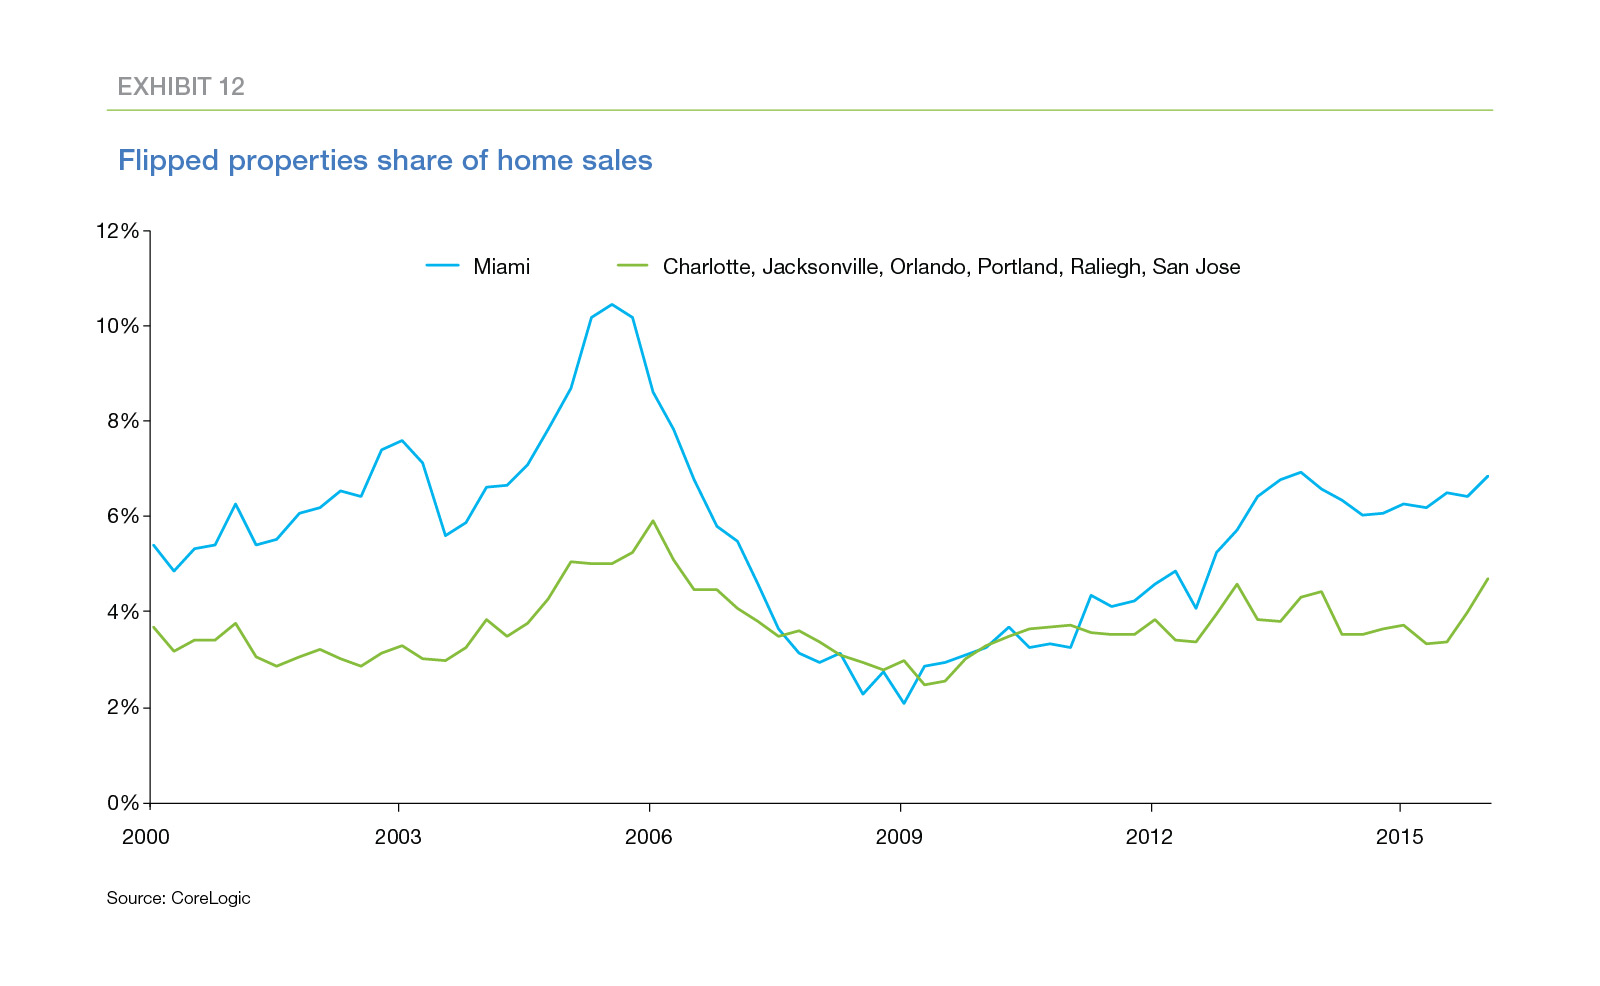 Line graph showing flipped properties share of home sale between Miami and Charlotte, Jacksonville, Orlando, Portland, Raleigh, San Jose from 2000 to 2015